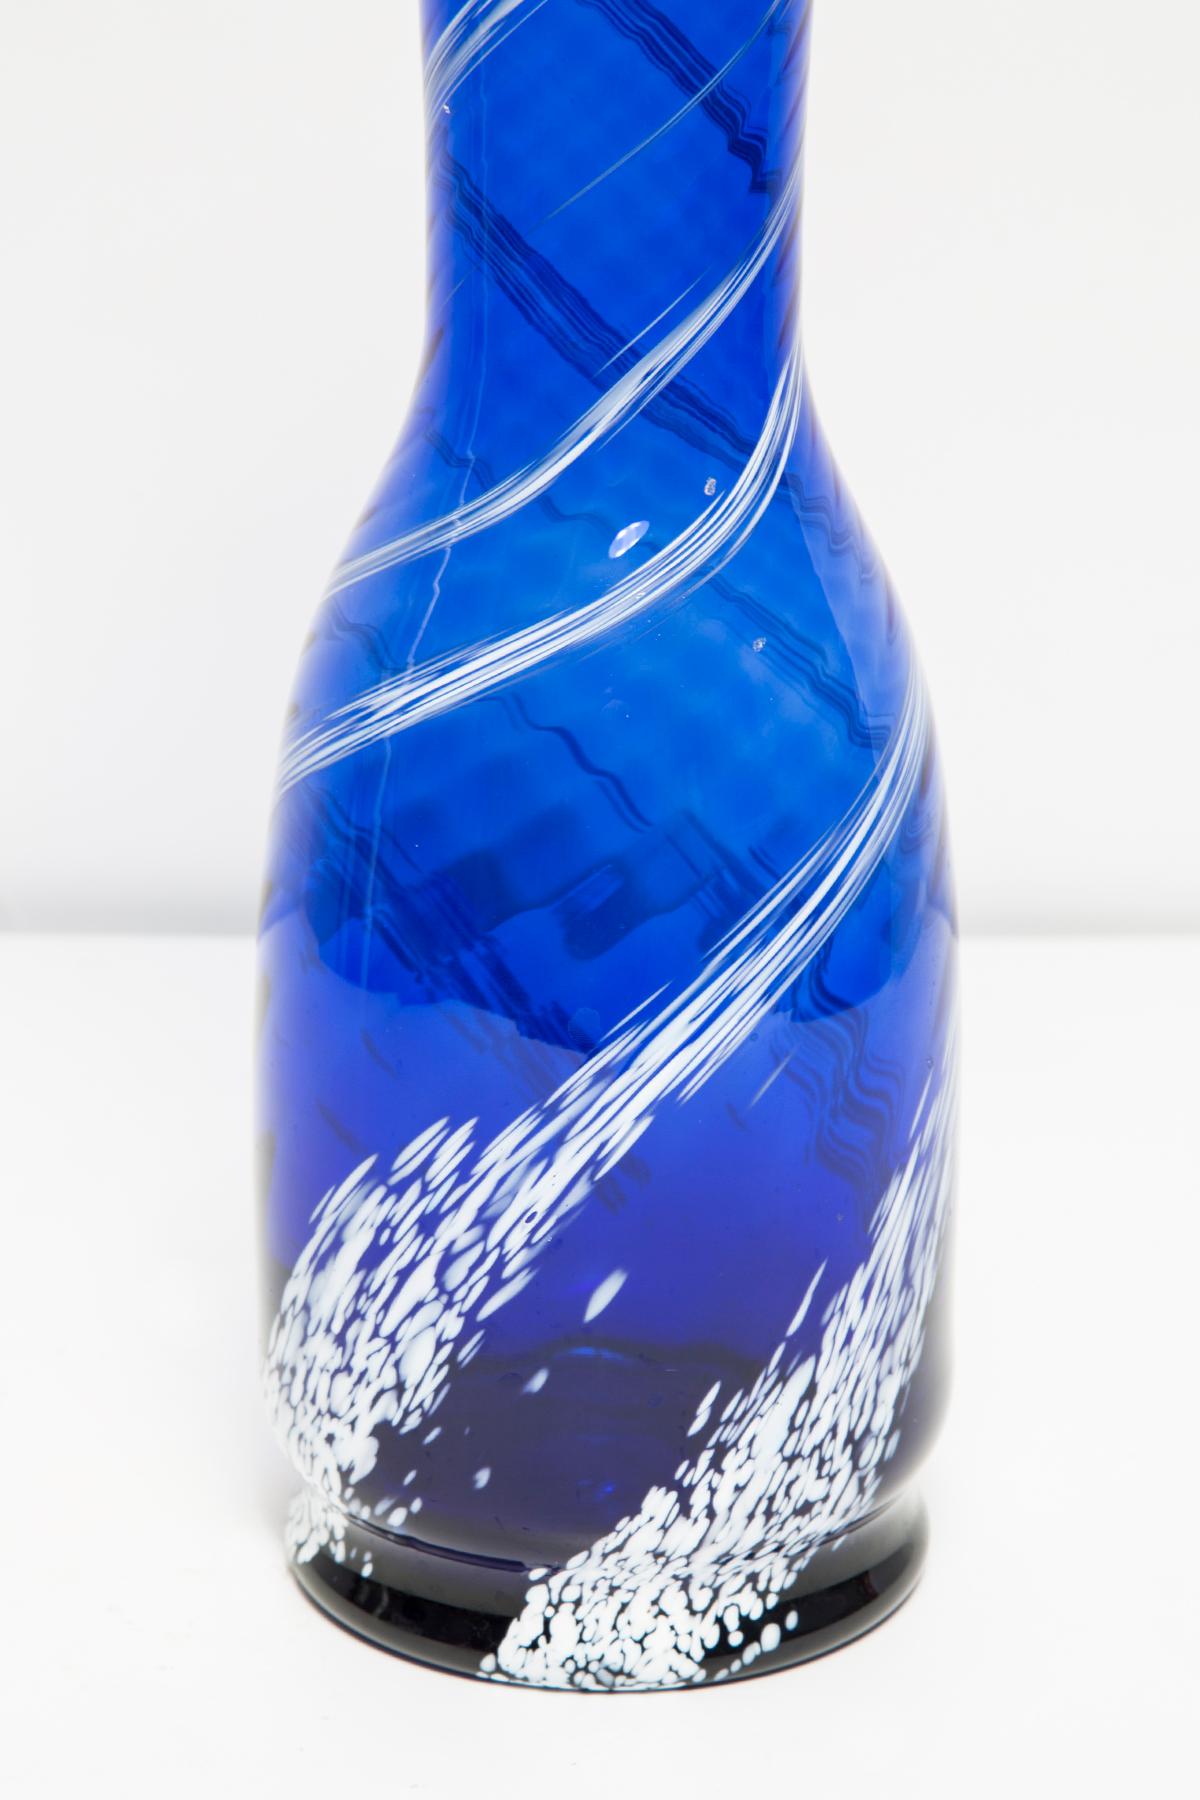 Mid Century Vintage Blue and White Artistic Glass Vase Bottle, Europe, 1970s For Sale 3